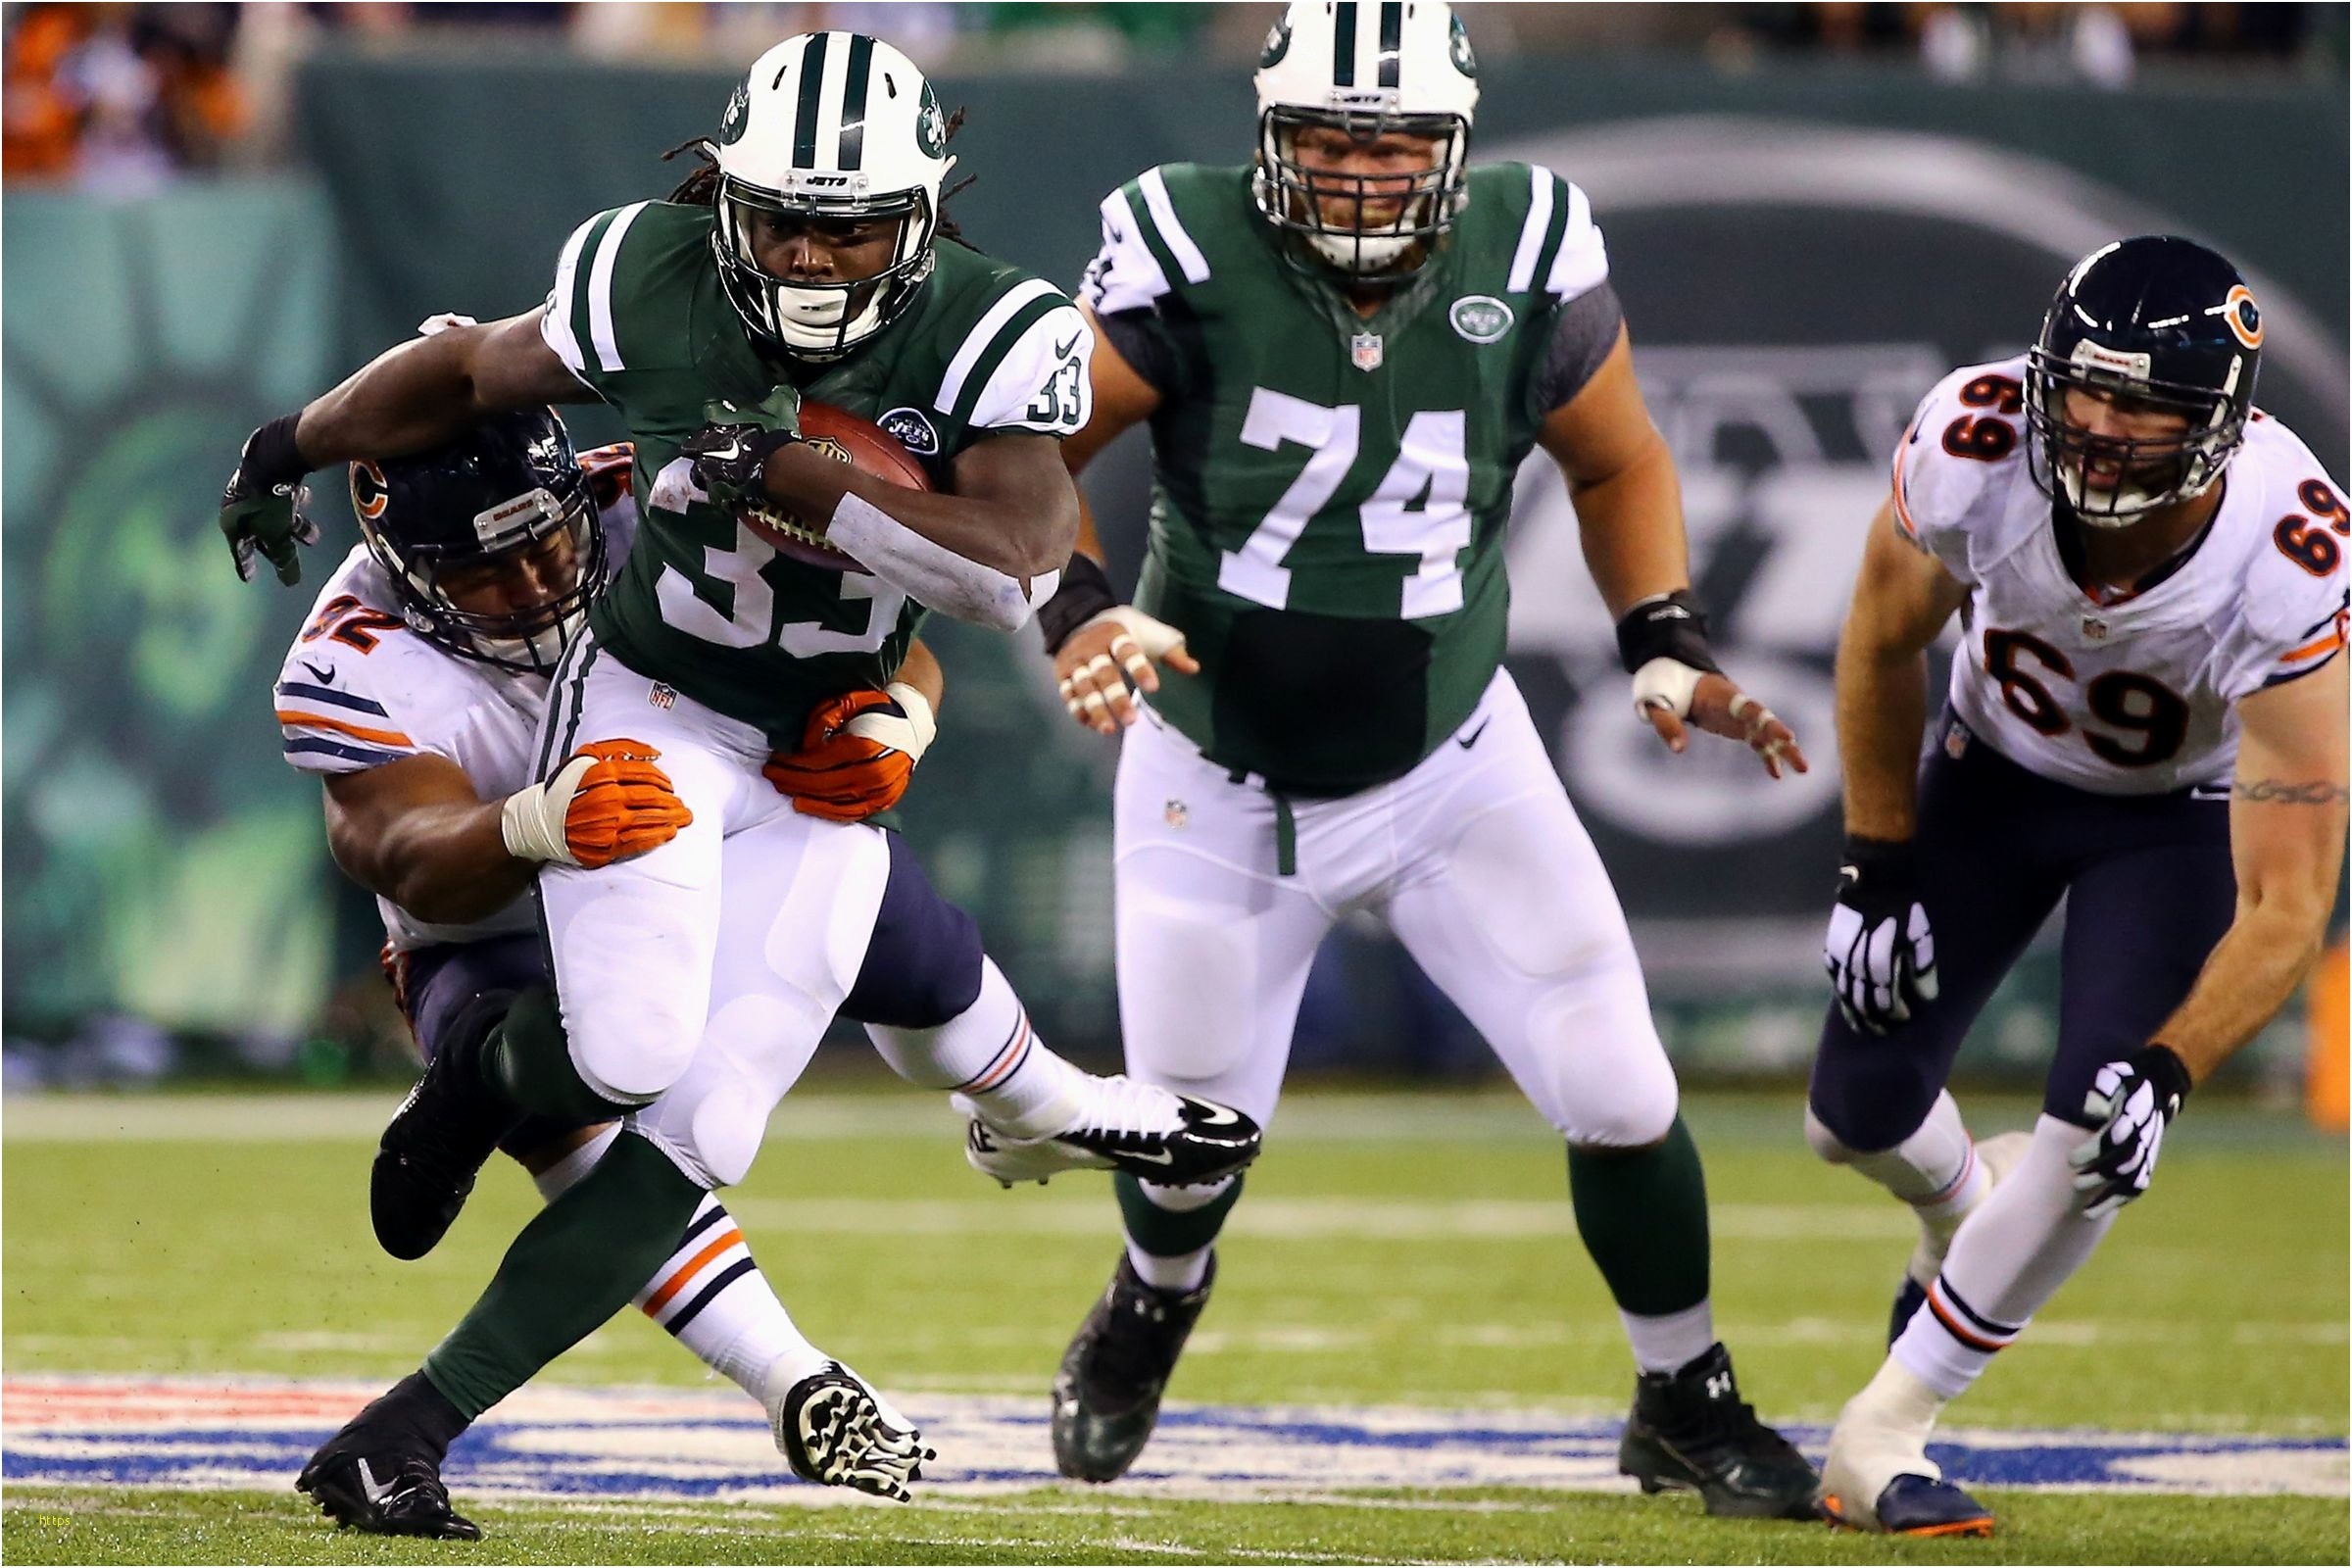 2400x1600 New York Jets Wallpaper Awesome New York Jets Wallpapers